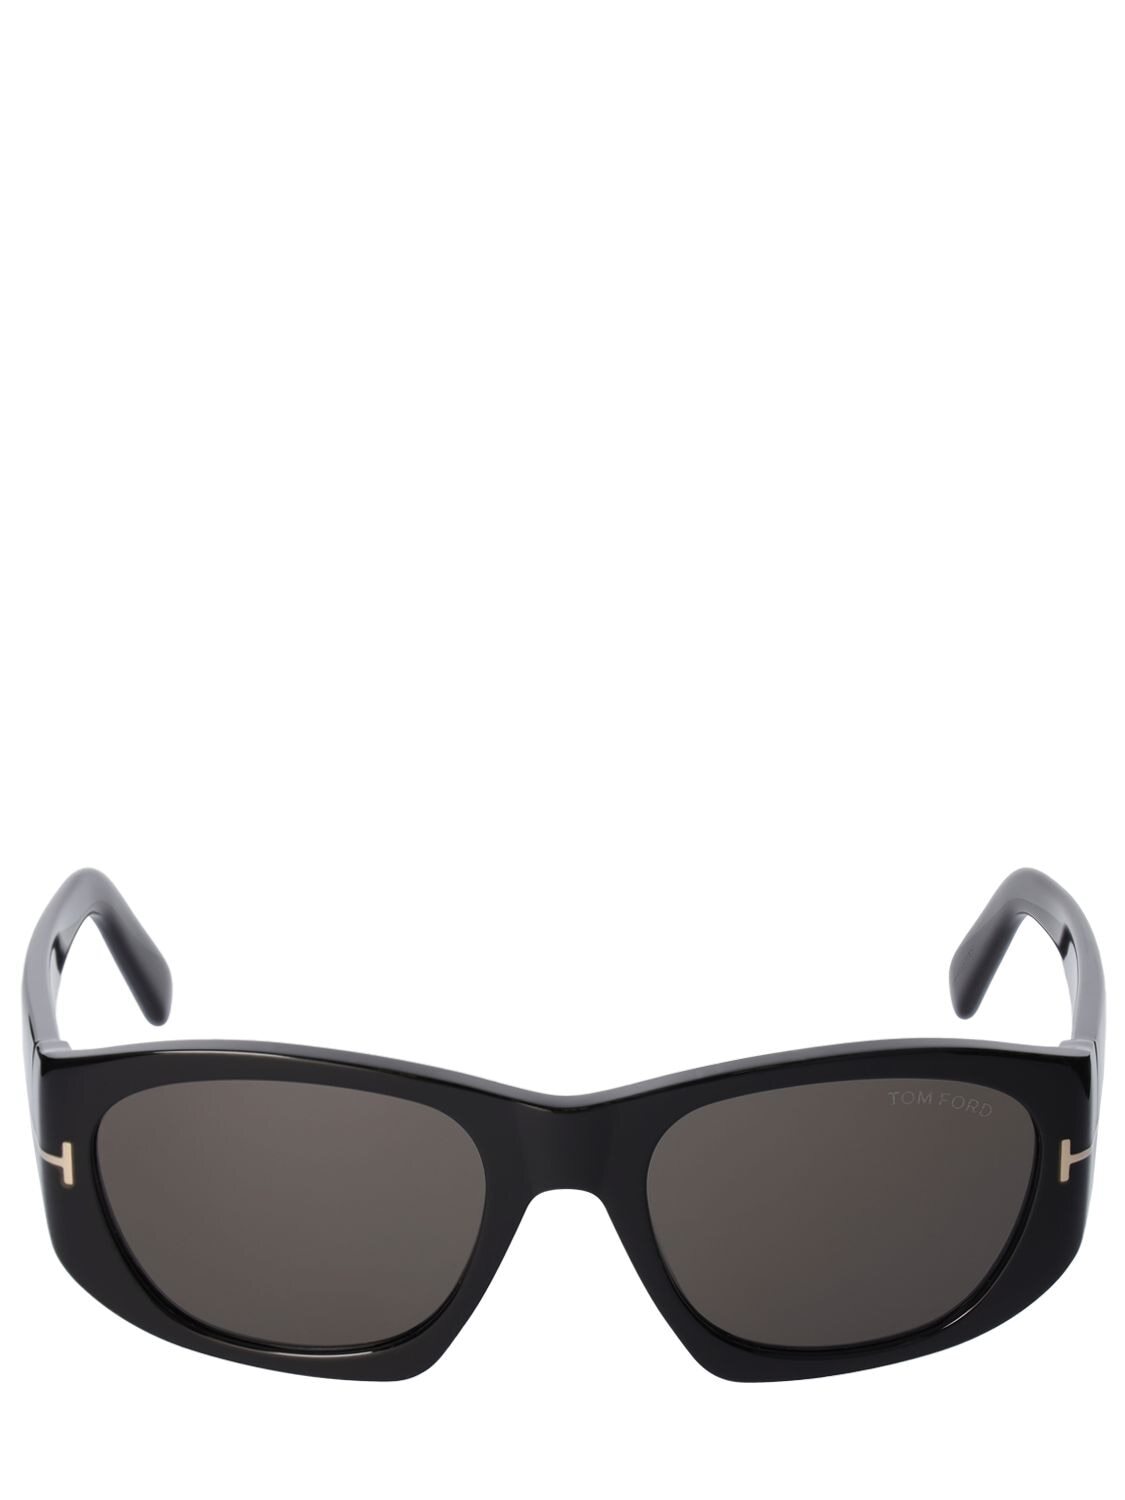 TOM FORD Cyrille Squared Eco-acetate Sunglasses in black